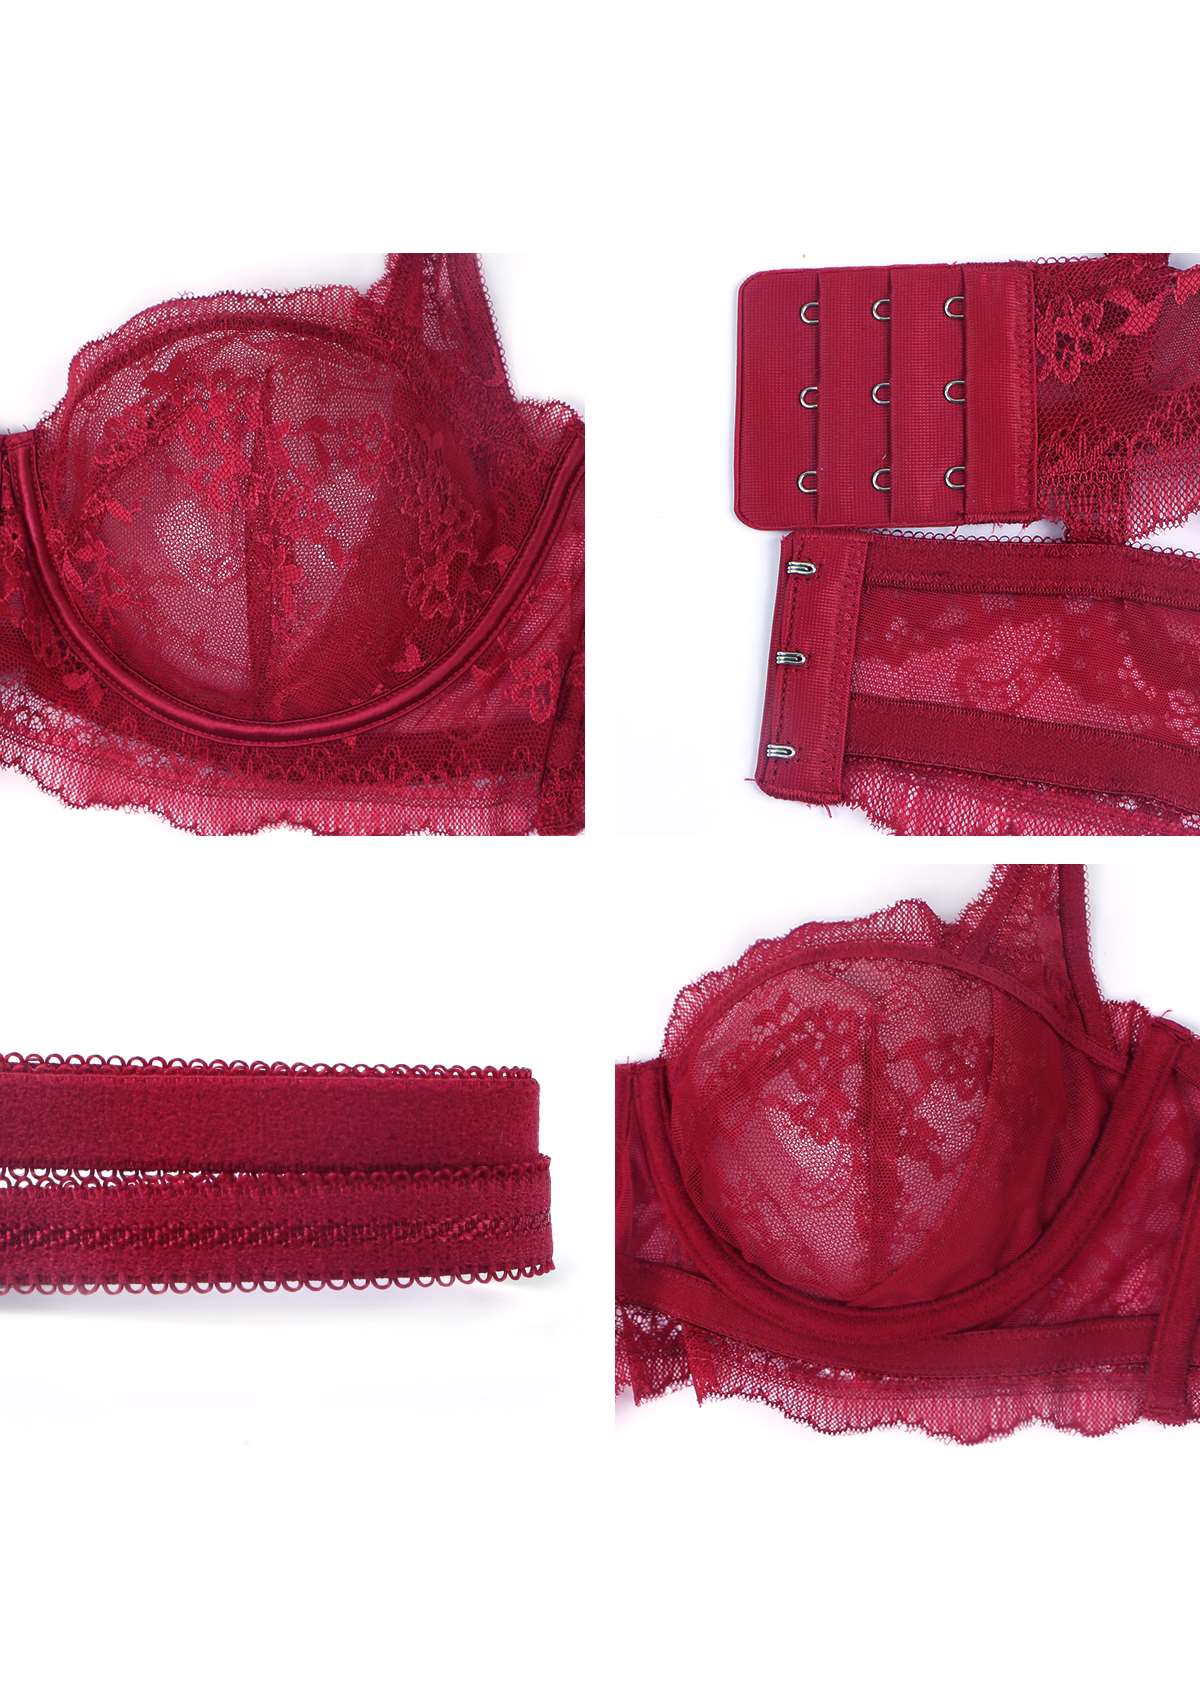 HSIA Floral Lace Unlined Bridal Balconette Bra Set - Supportive Classic - Burgundy / 38 / D